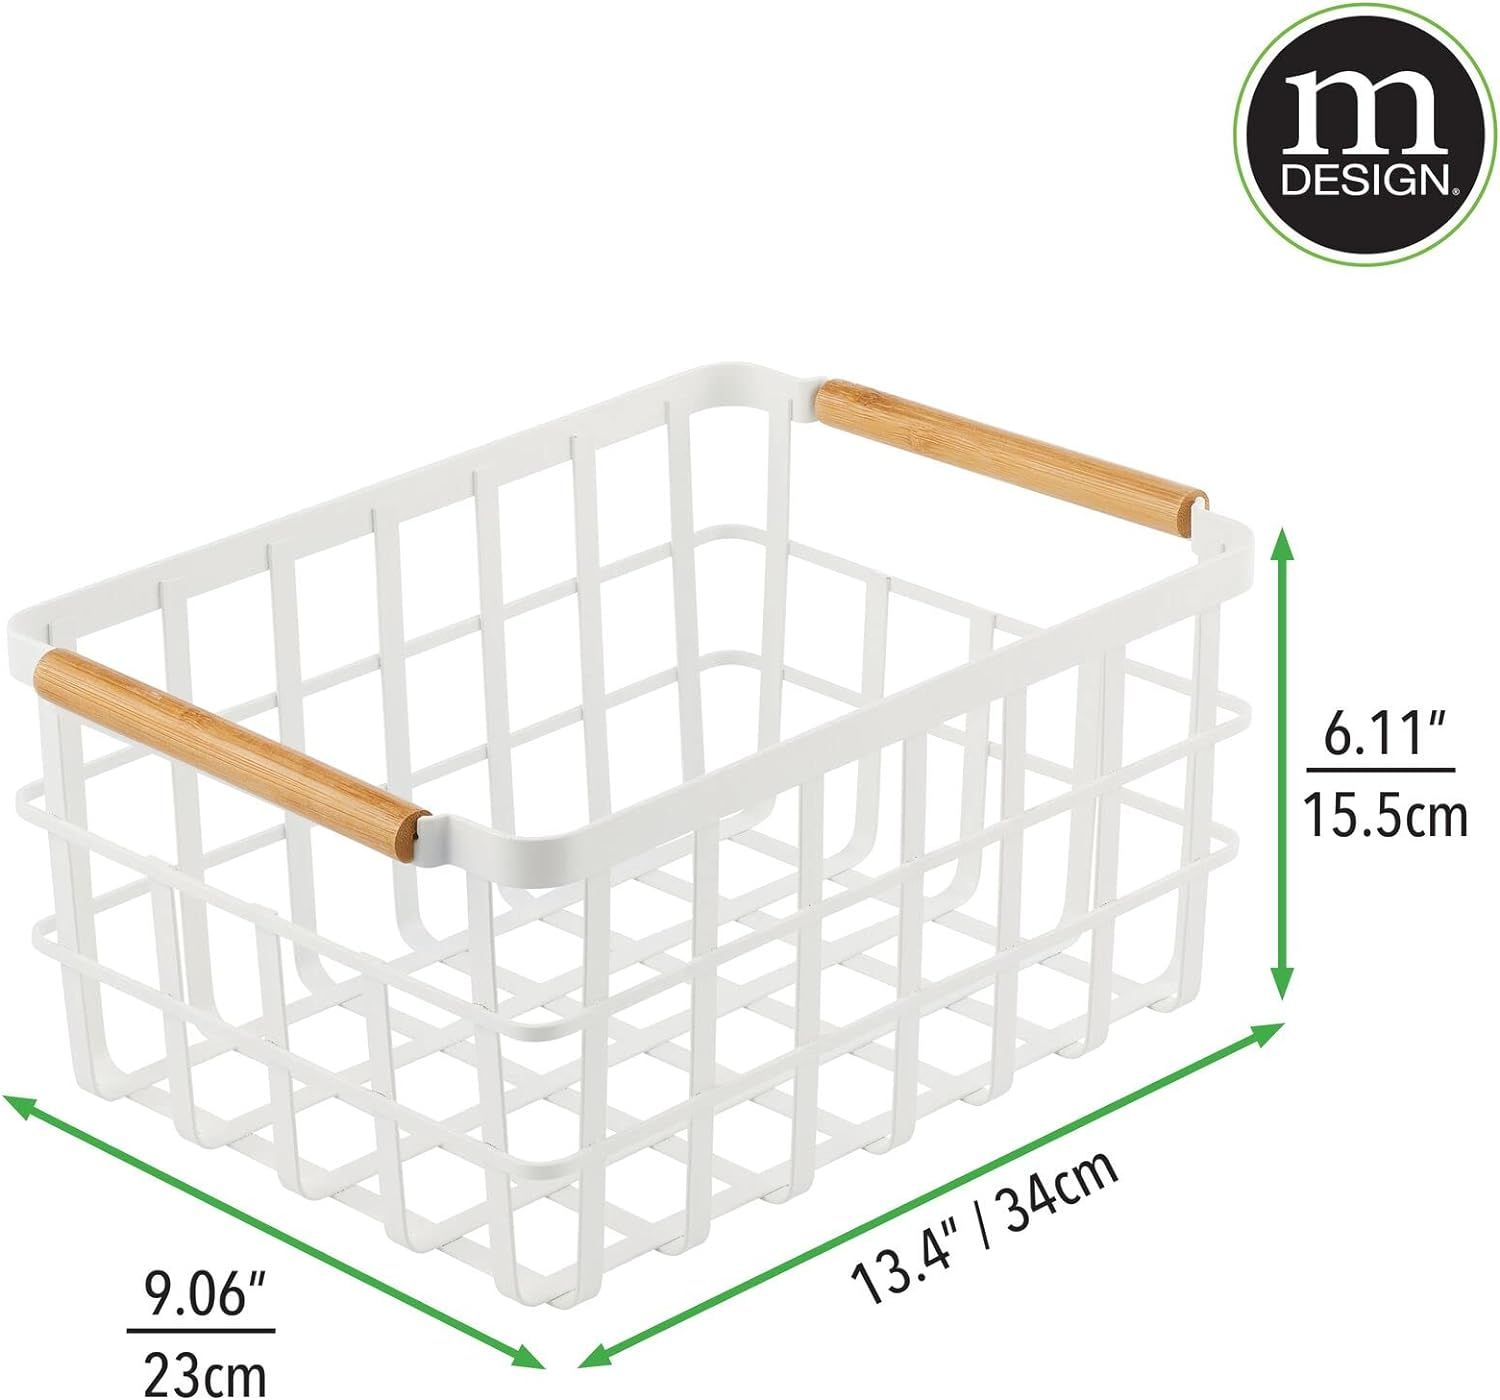 mDesign Metal Wire Food Organizer Storage Bin Basket with Bamboo Handles for Kitchen Cabinets/Pan... | Amazon (US)